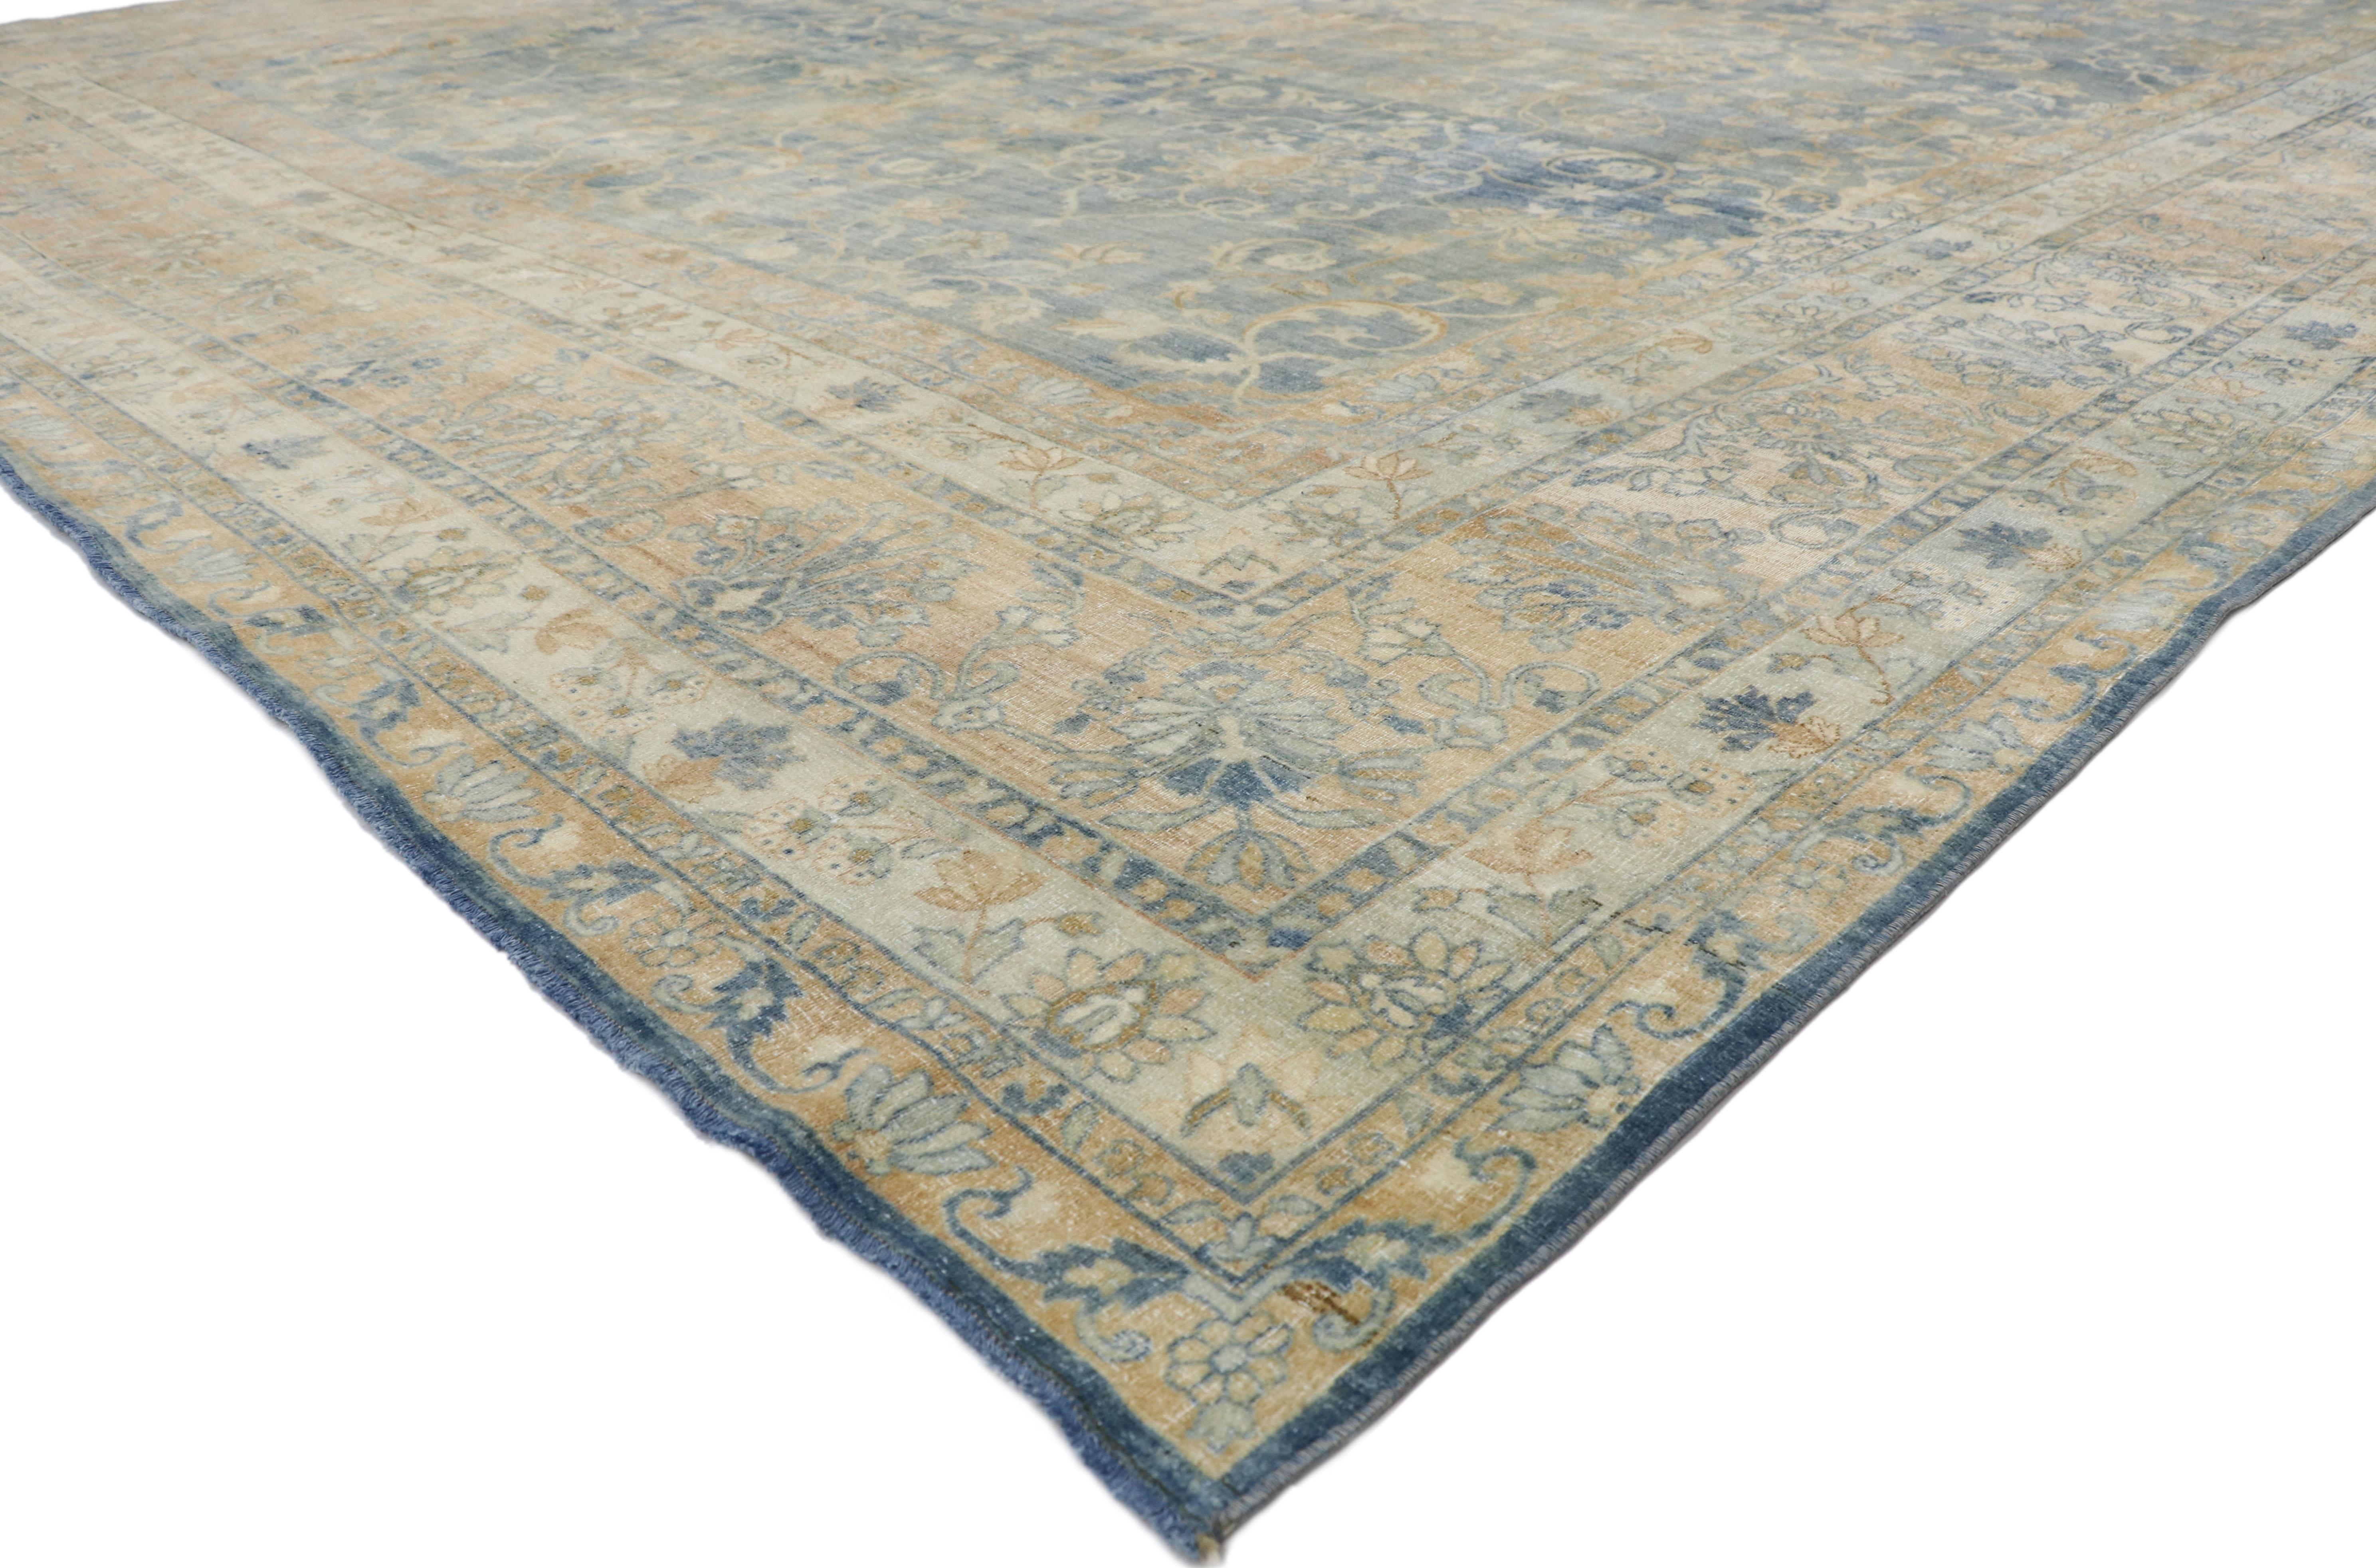 76737 Antique Persian Kerman Rug Hotel Lobby Size 11'09 x 18'07.
With its casual elegance and lovingly timeworn appearance combined with light and airy colors, this hand knotted wool distressed antique Persian Kerman palace rug charms with ease and